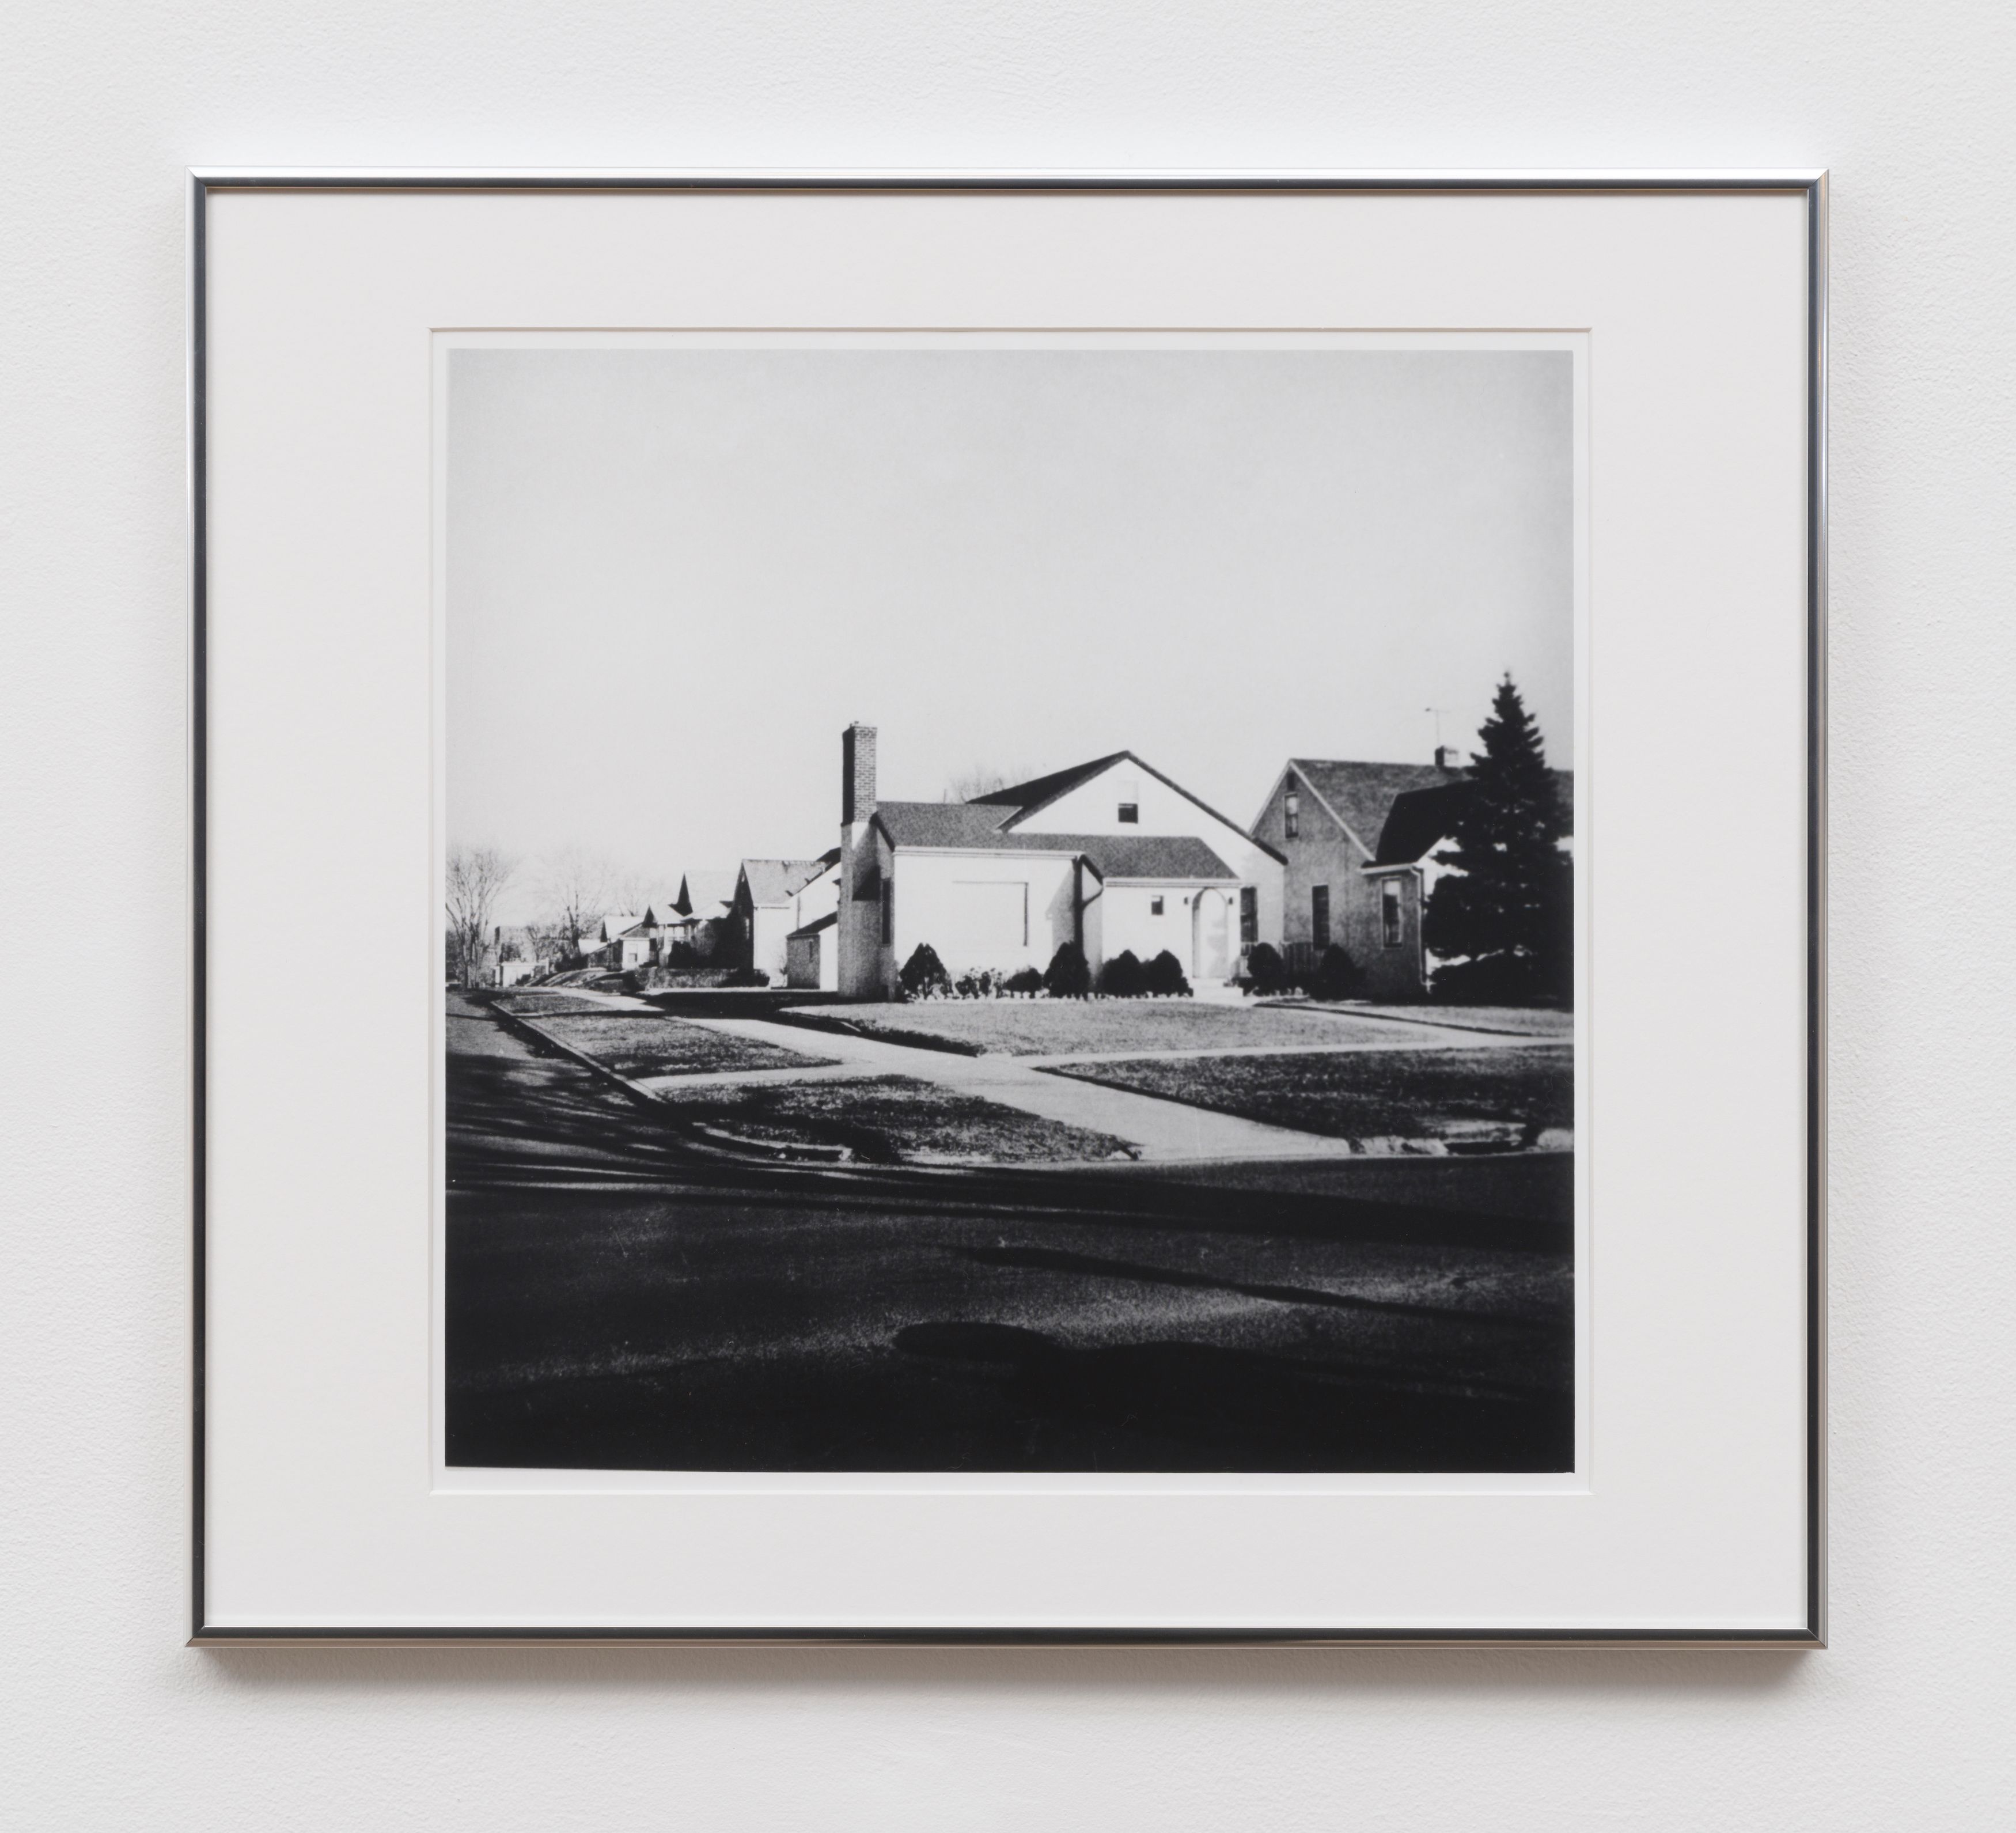 Erin Calla Watson, Landscape, St Paul, 2023, gelatin silver print, 14 x 14 in. (35.56 x 35.56 cm) (image size), 18 x 20 in. (45.72 x 50.08 cm) (framed size), edition of 3 with 2 AP